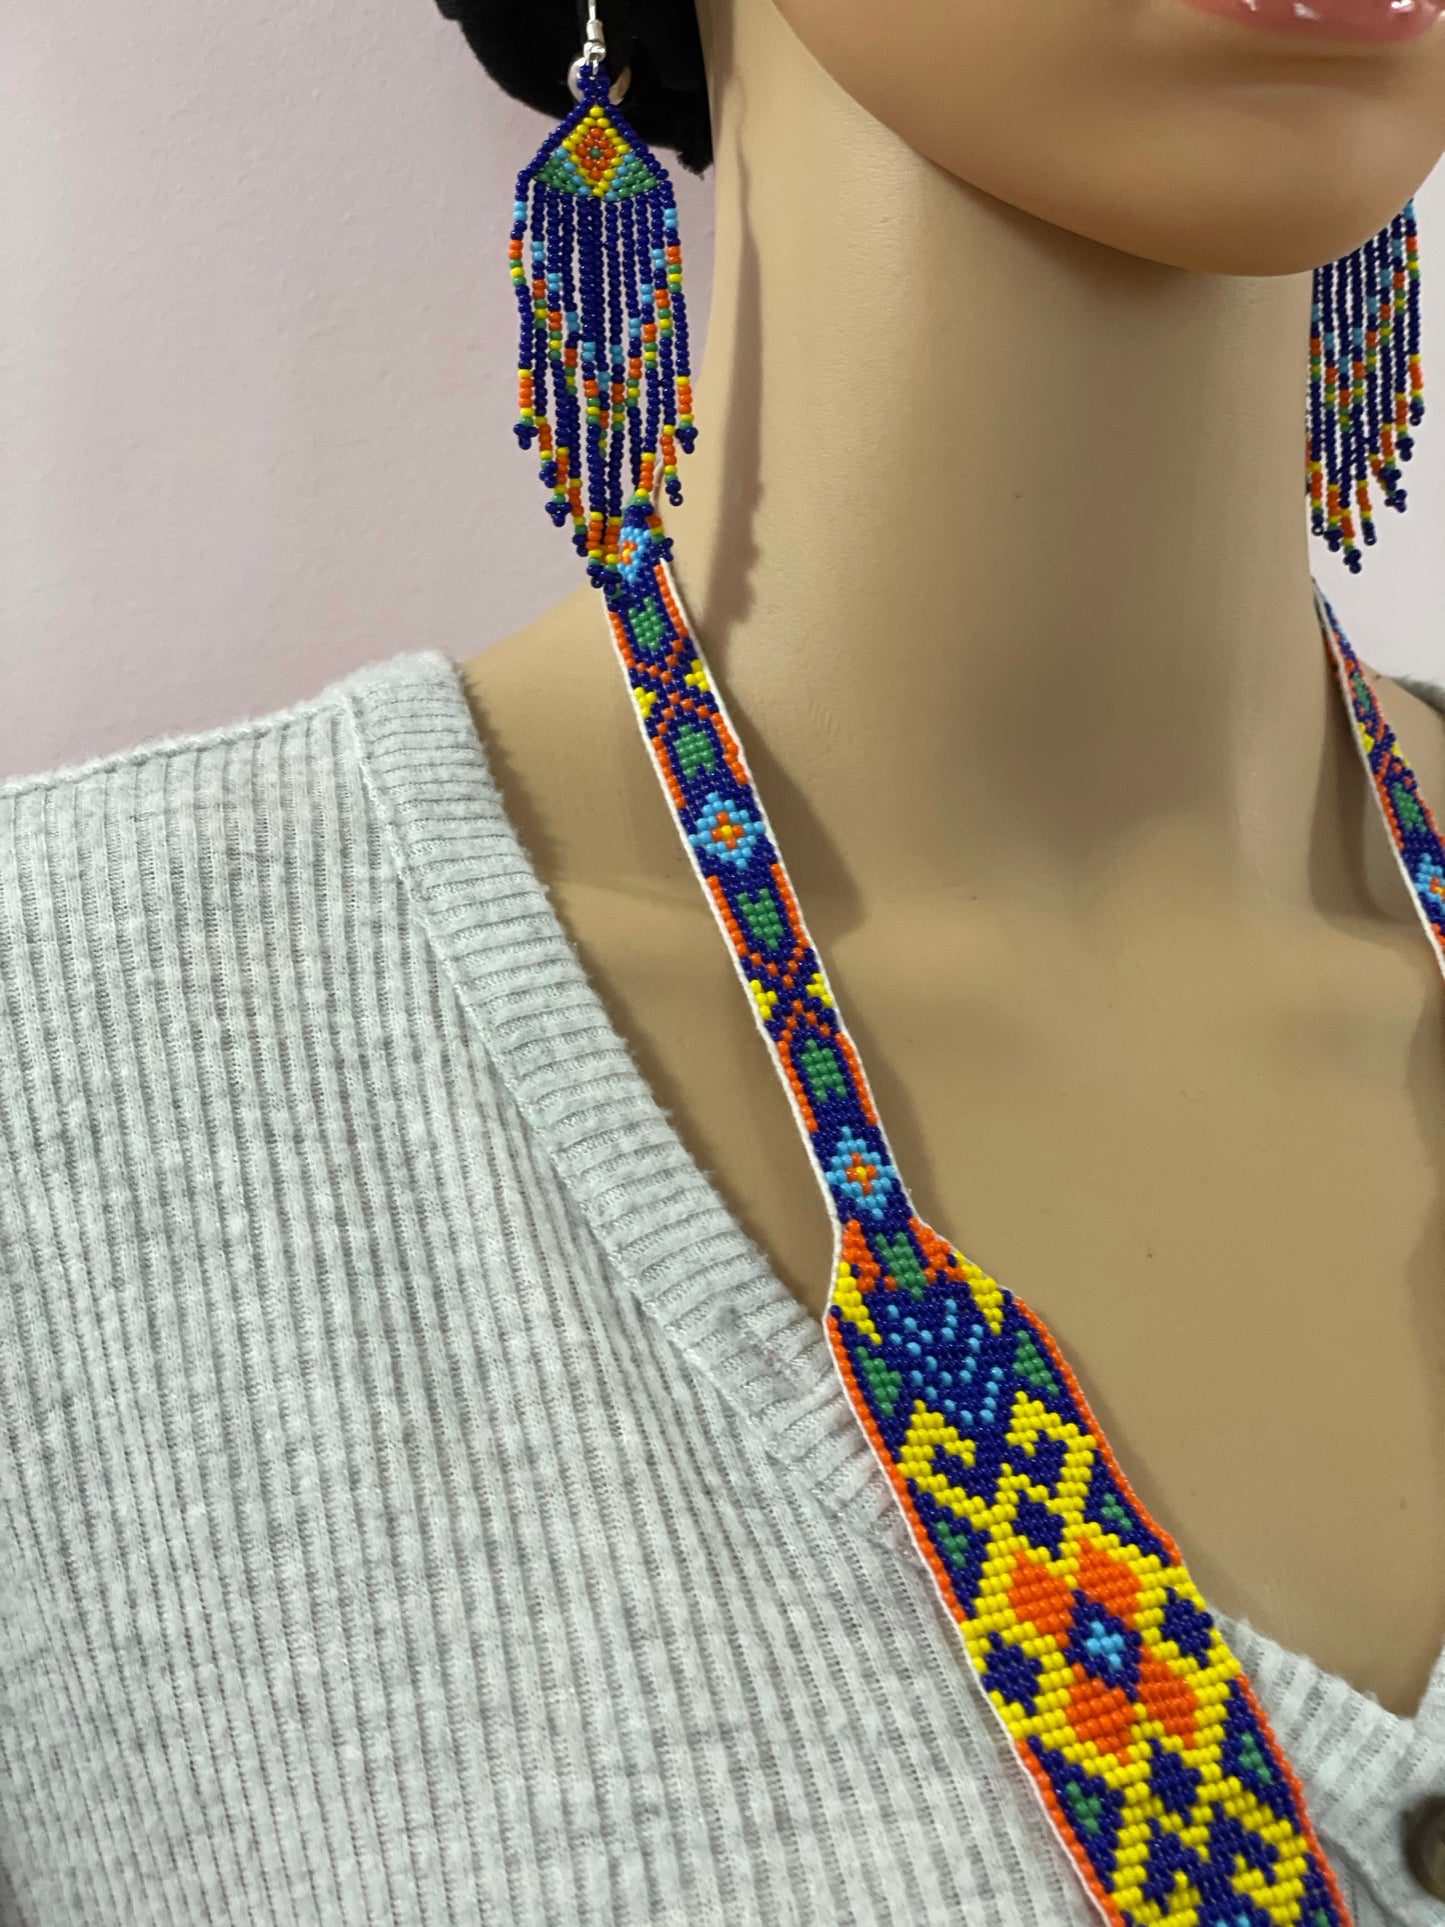 Handcrafted bead necklace earrings African fusion jewelry